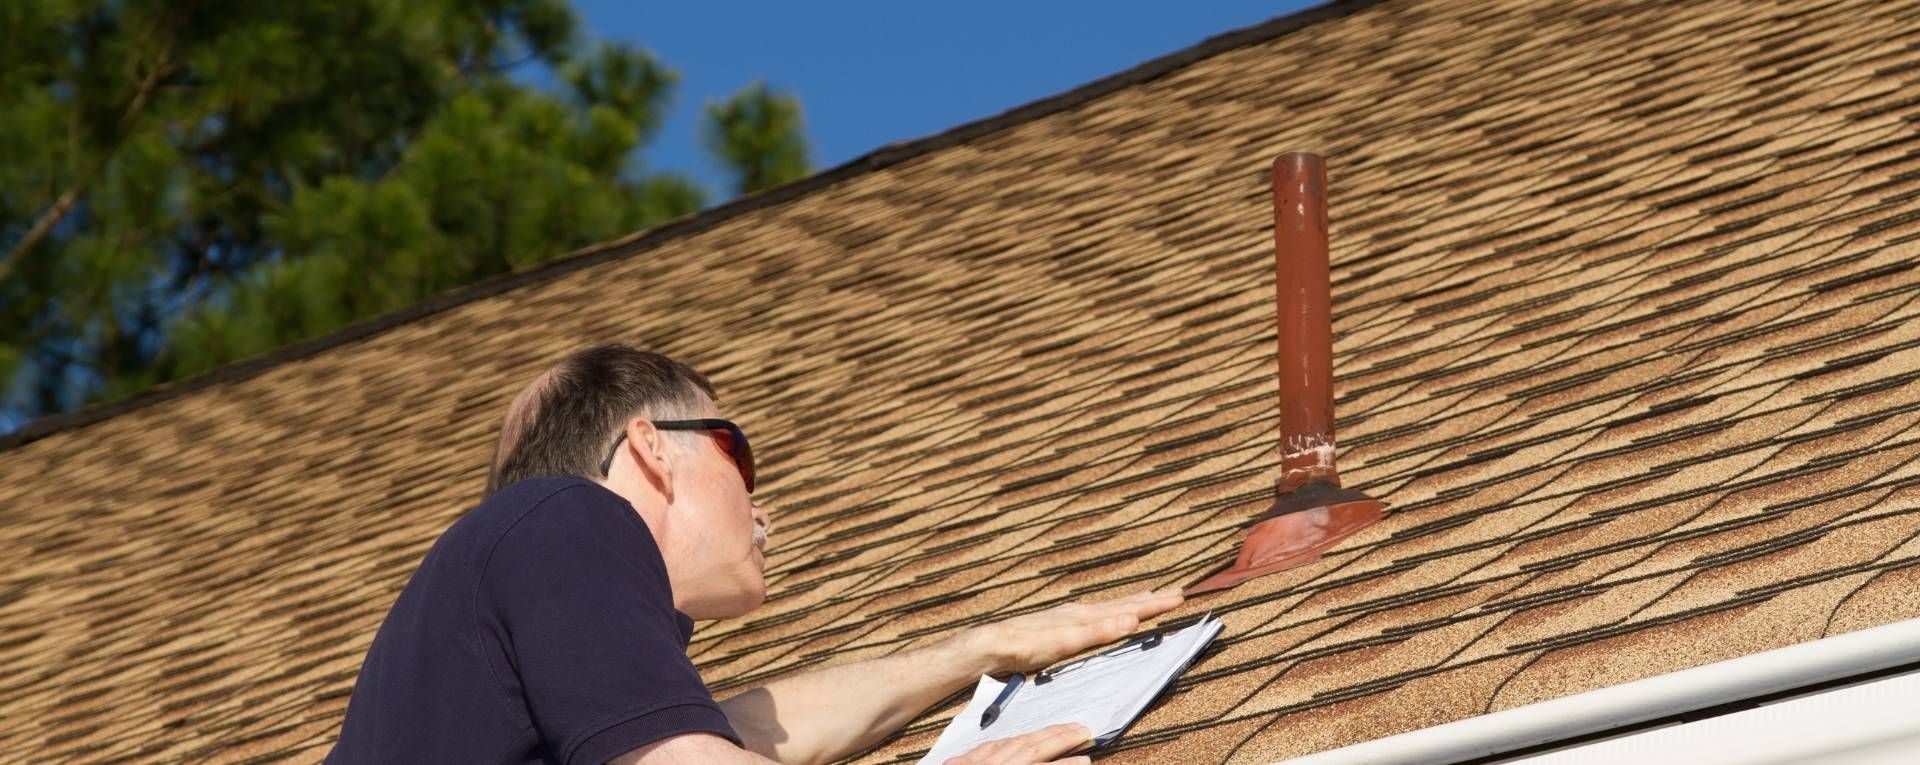 Do You Need Roof Vents for Tile Roofs?